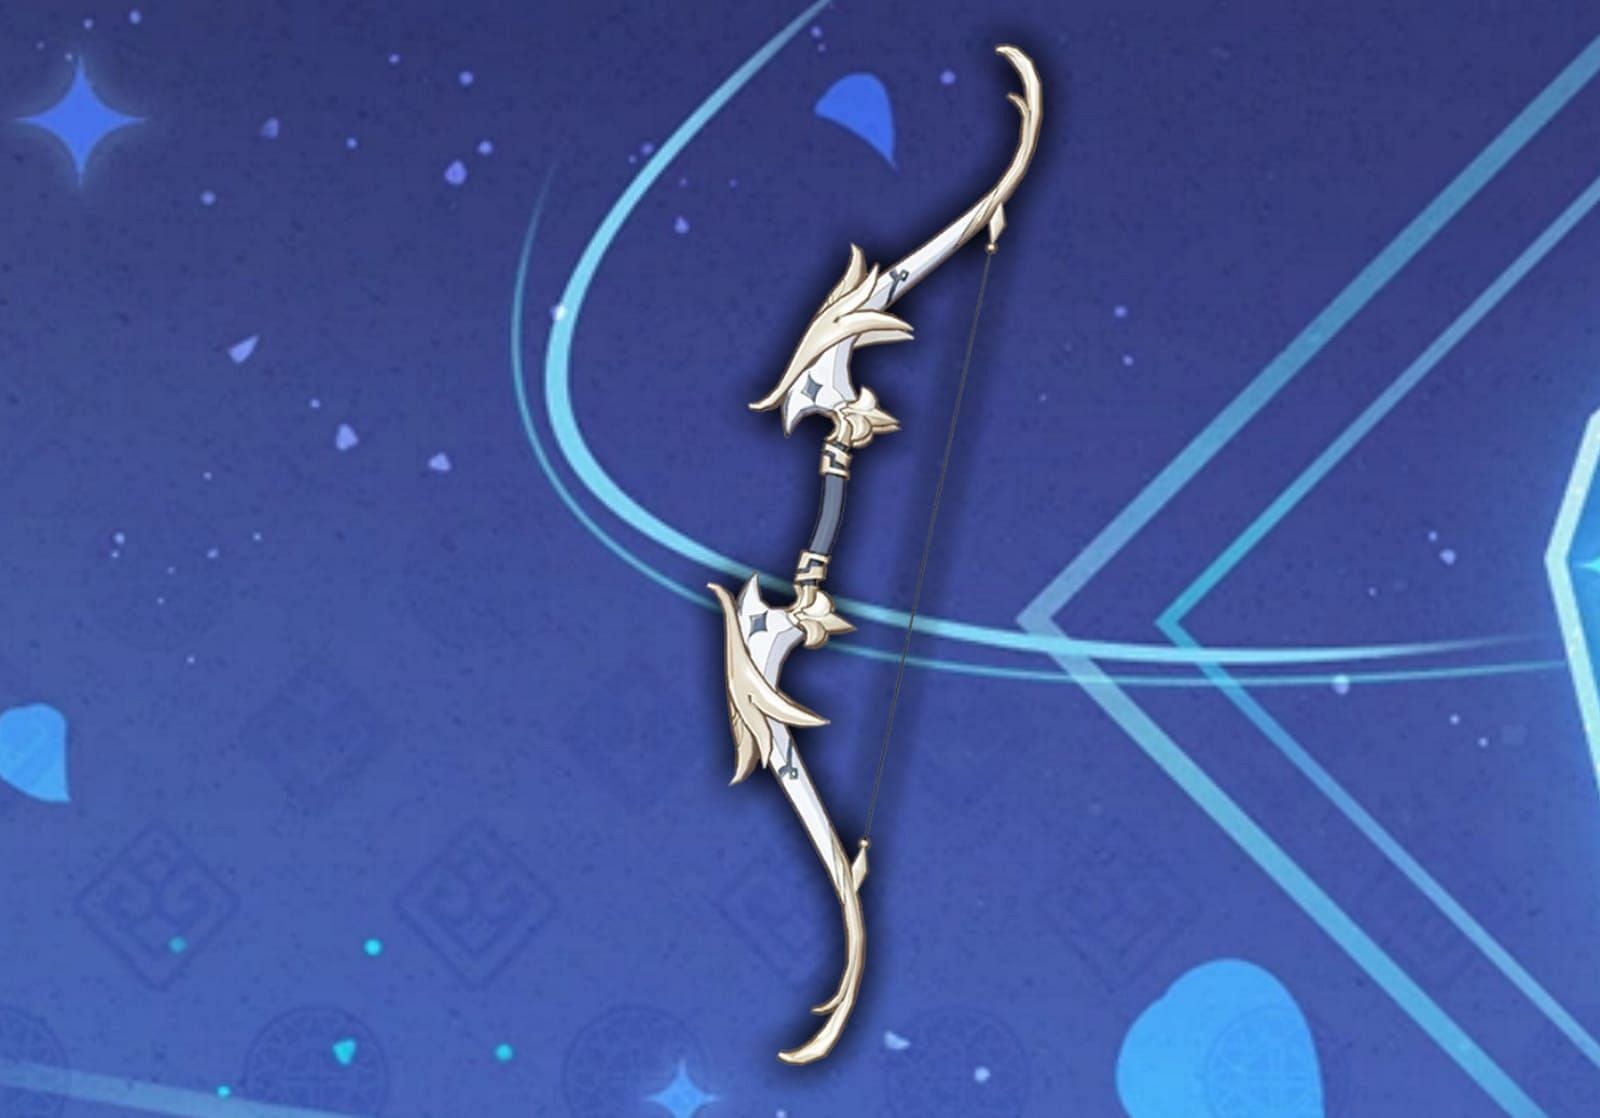 Every F2P player should have access to this weapon (Image via miHoYo)